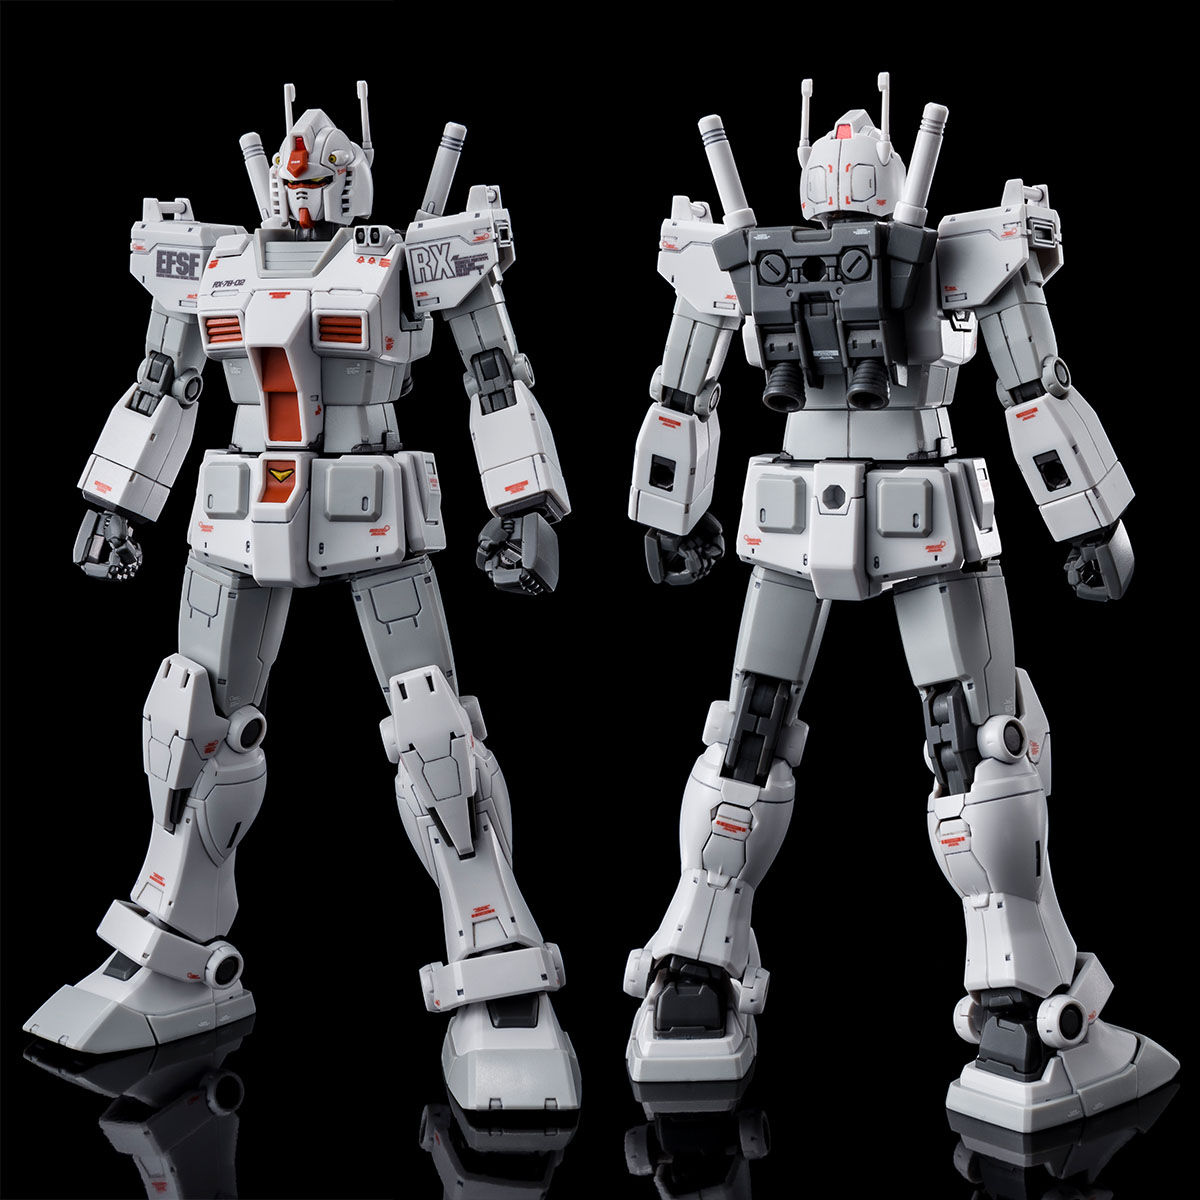 Hg 1 144 Rx 78 02 Gundam Rollout Color Gundam The Origin Ver May 21 Delivery Gundam Premium Bandai Singapore Online Store For Action Figures Model Kits Toys And More